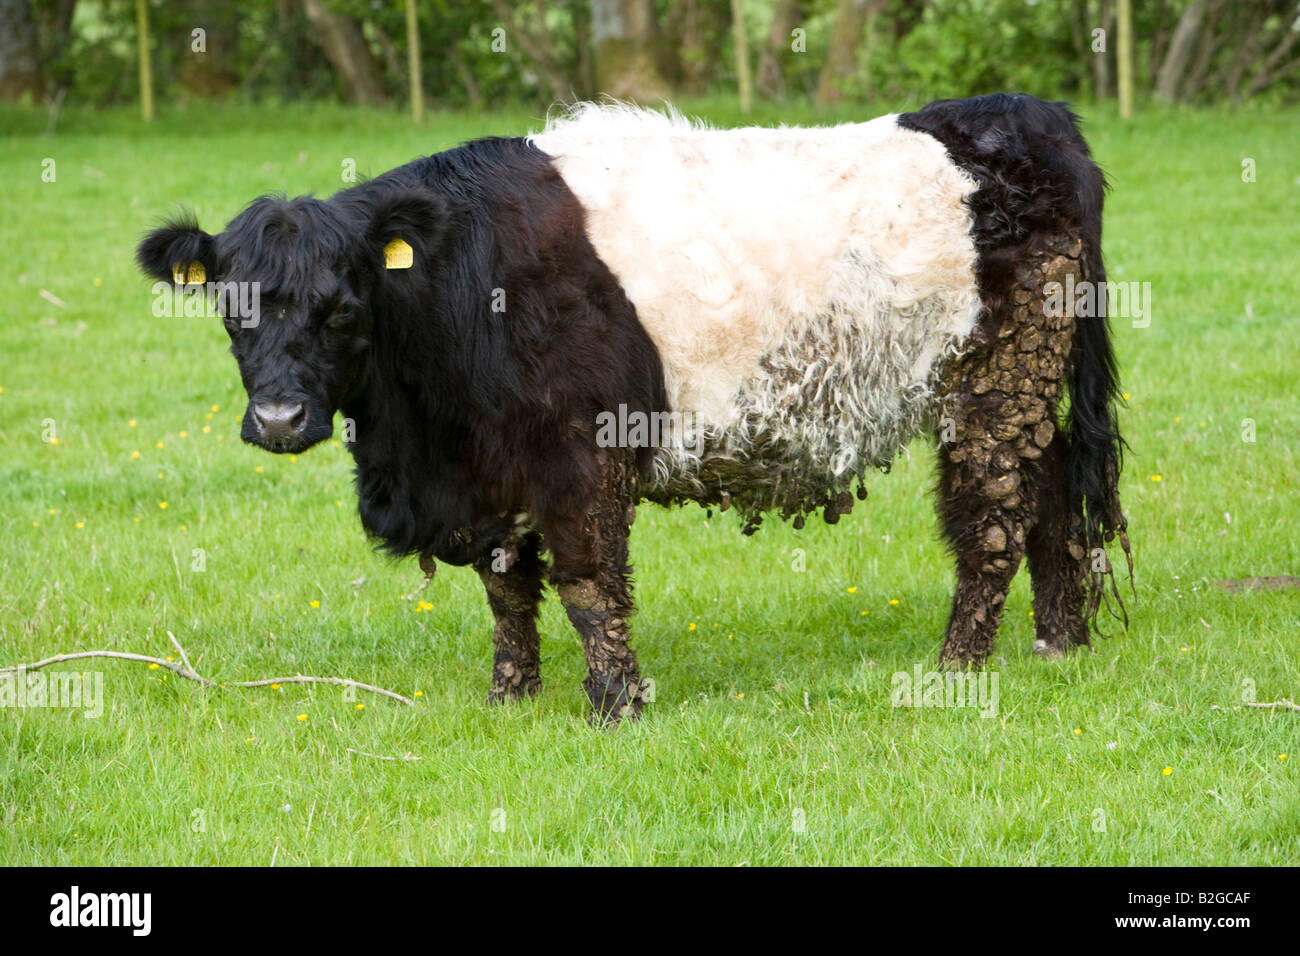 Belted Galloway rare breeds cow Stock Photo